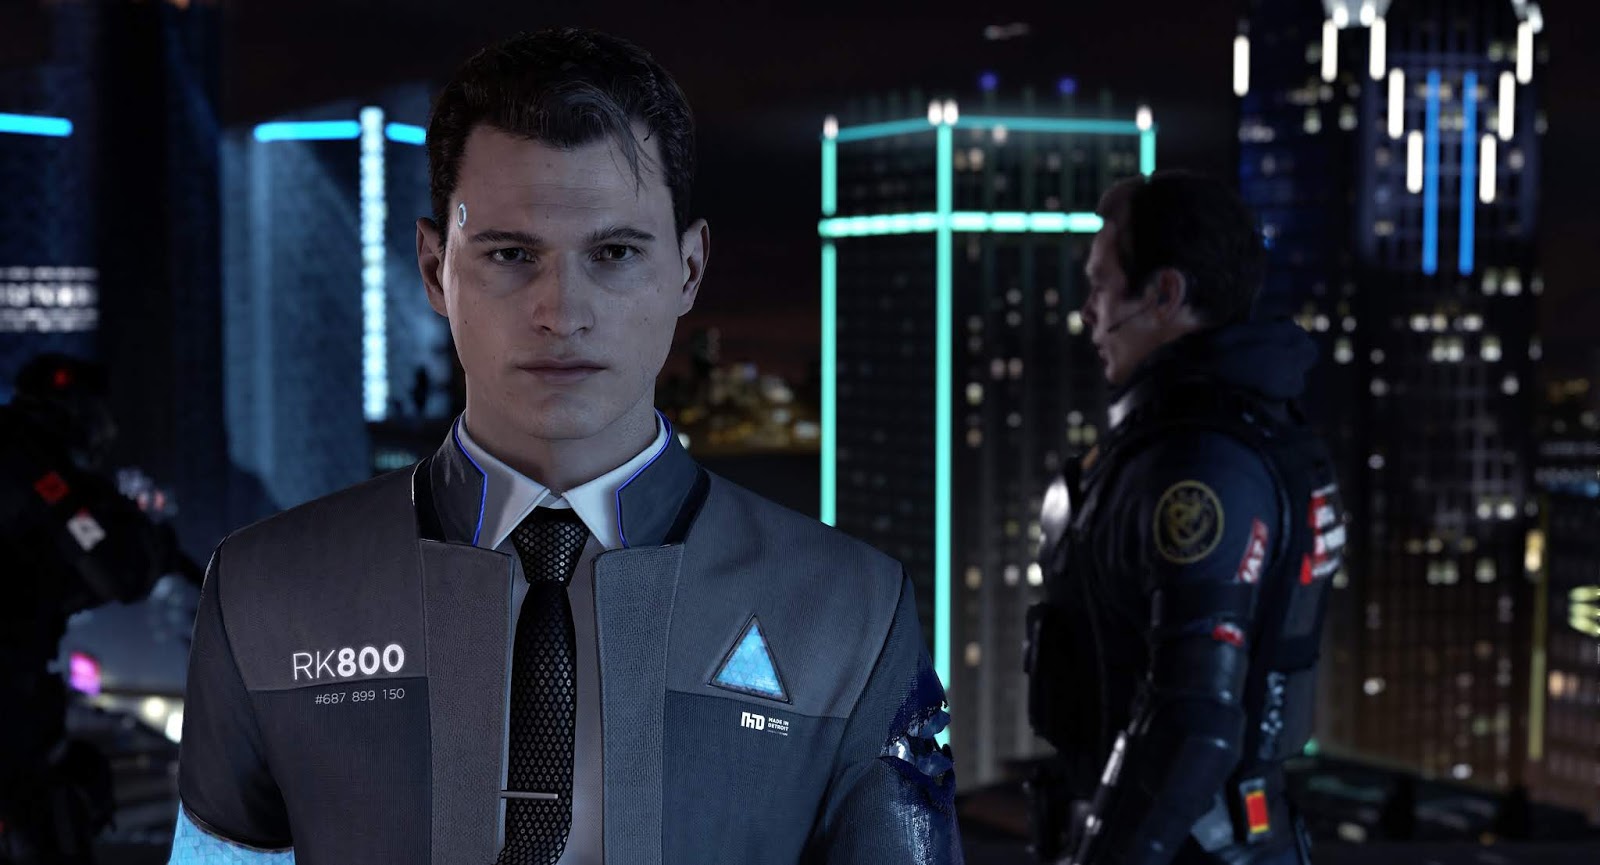 Behind The Scenes - Detroit: Become Human [Making of] 